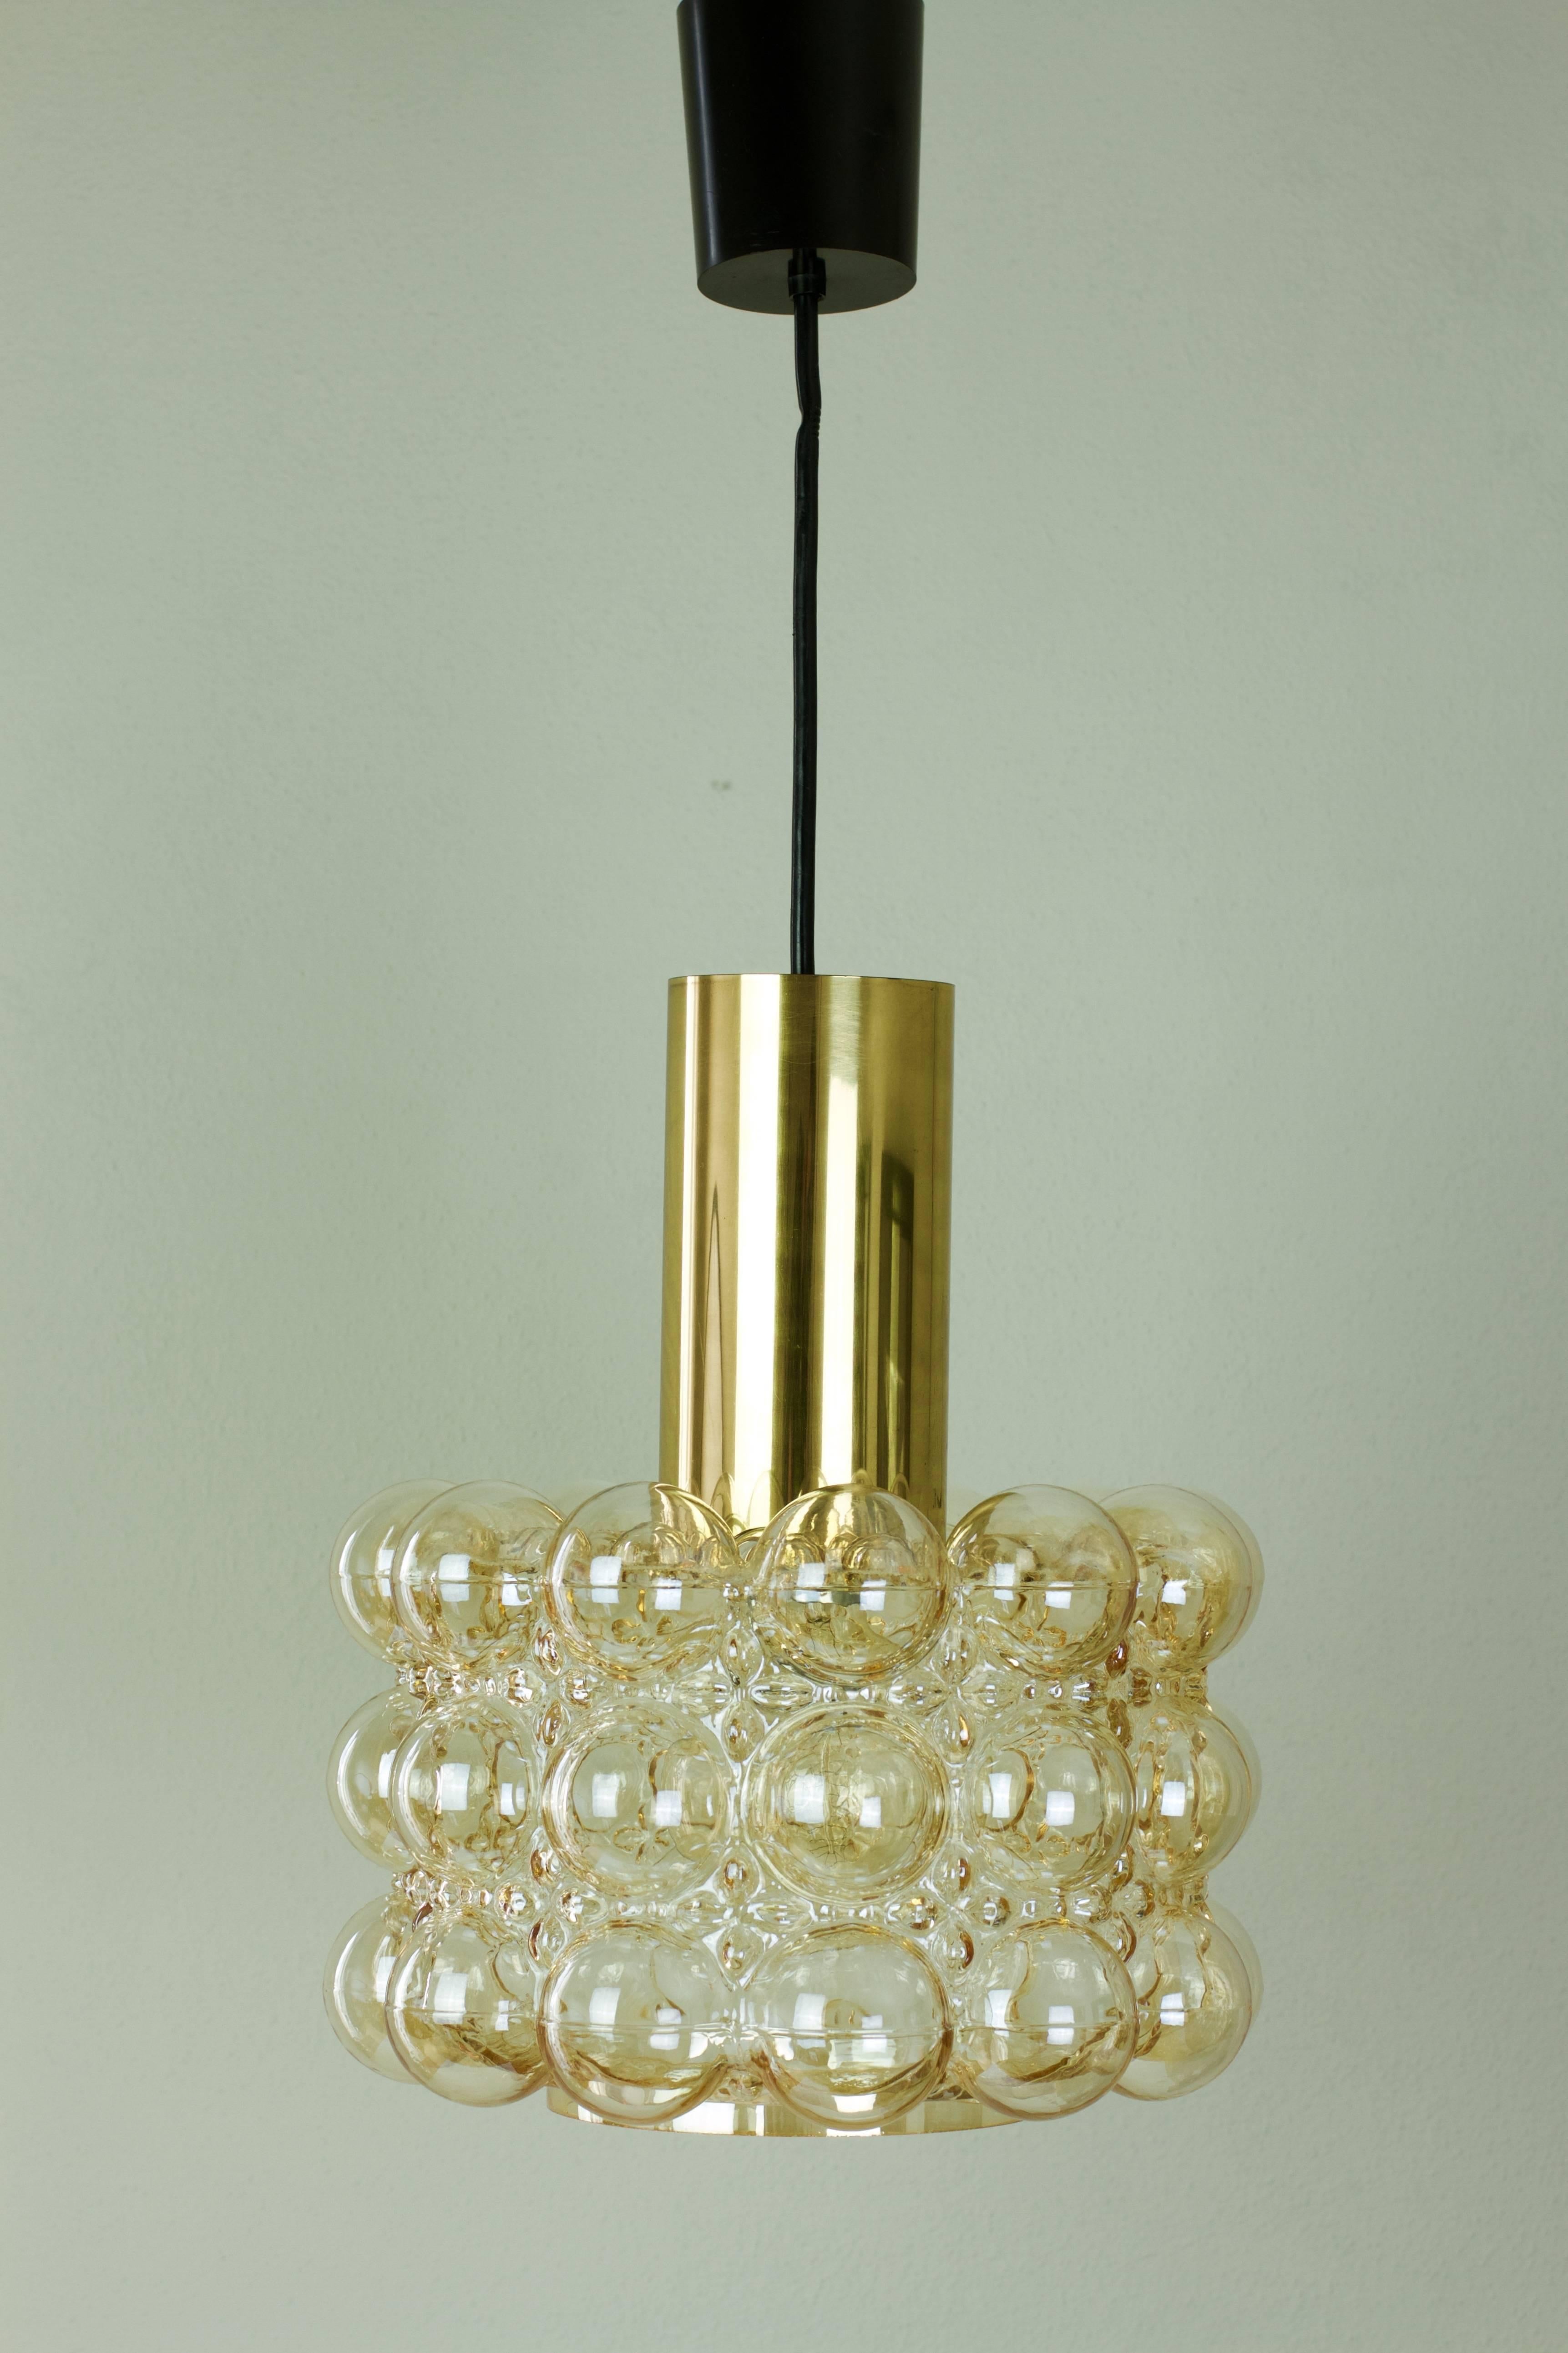 Late 1960s bubble glass ceiling pendent light designed by Helena Tynell for Glashütte Limburg. The light features a beautiful lampshade made from amber or champagne colored / coloured glass with a polished brass cylinder on top.

This, German